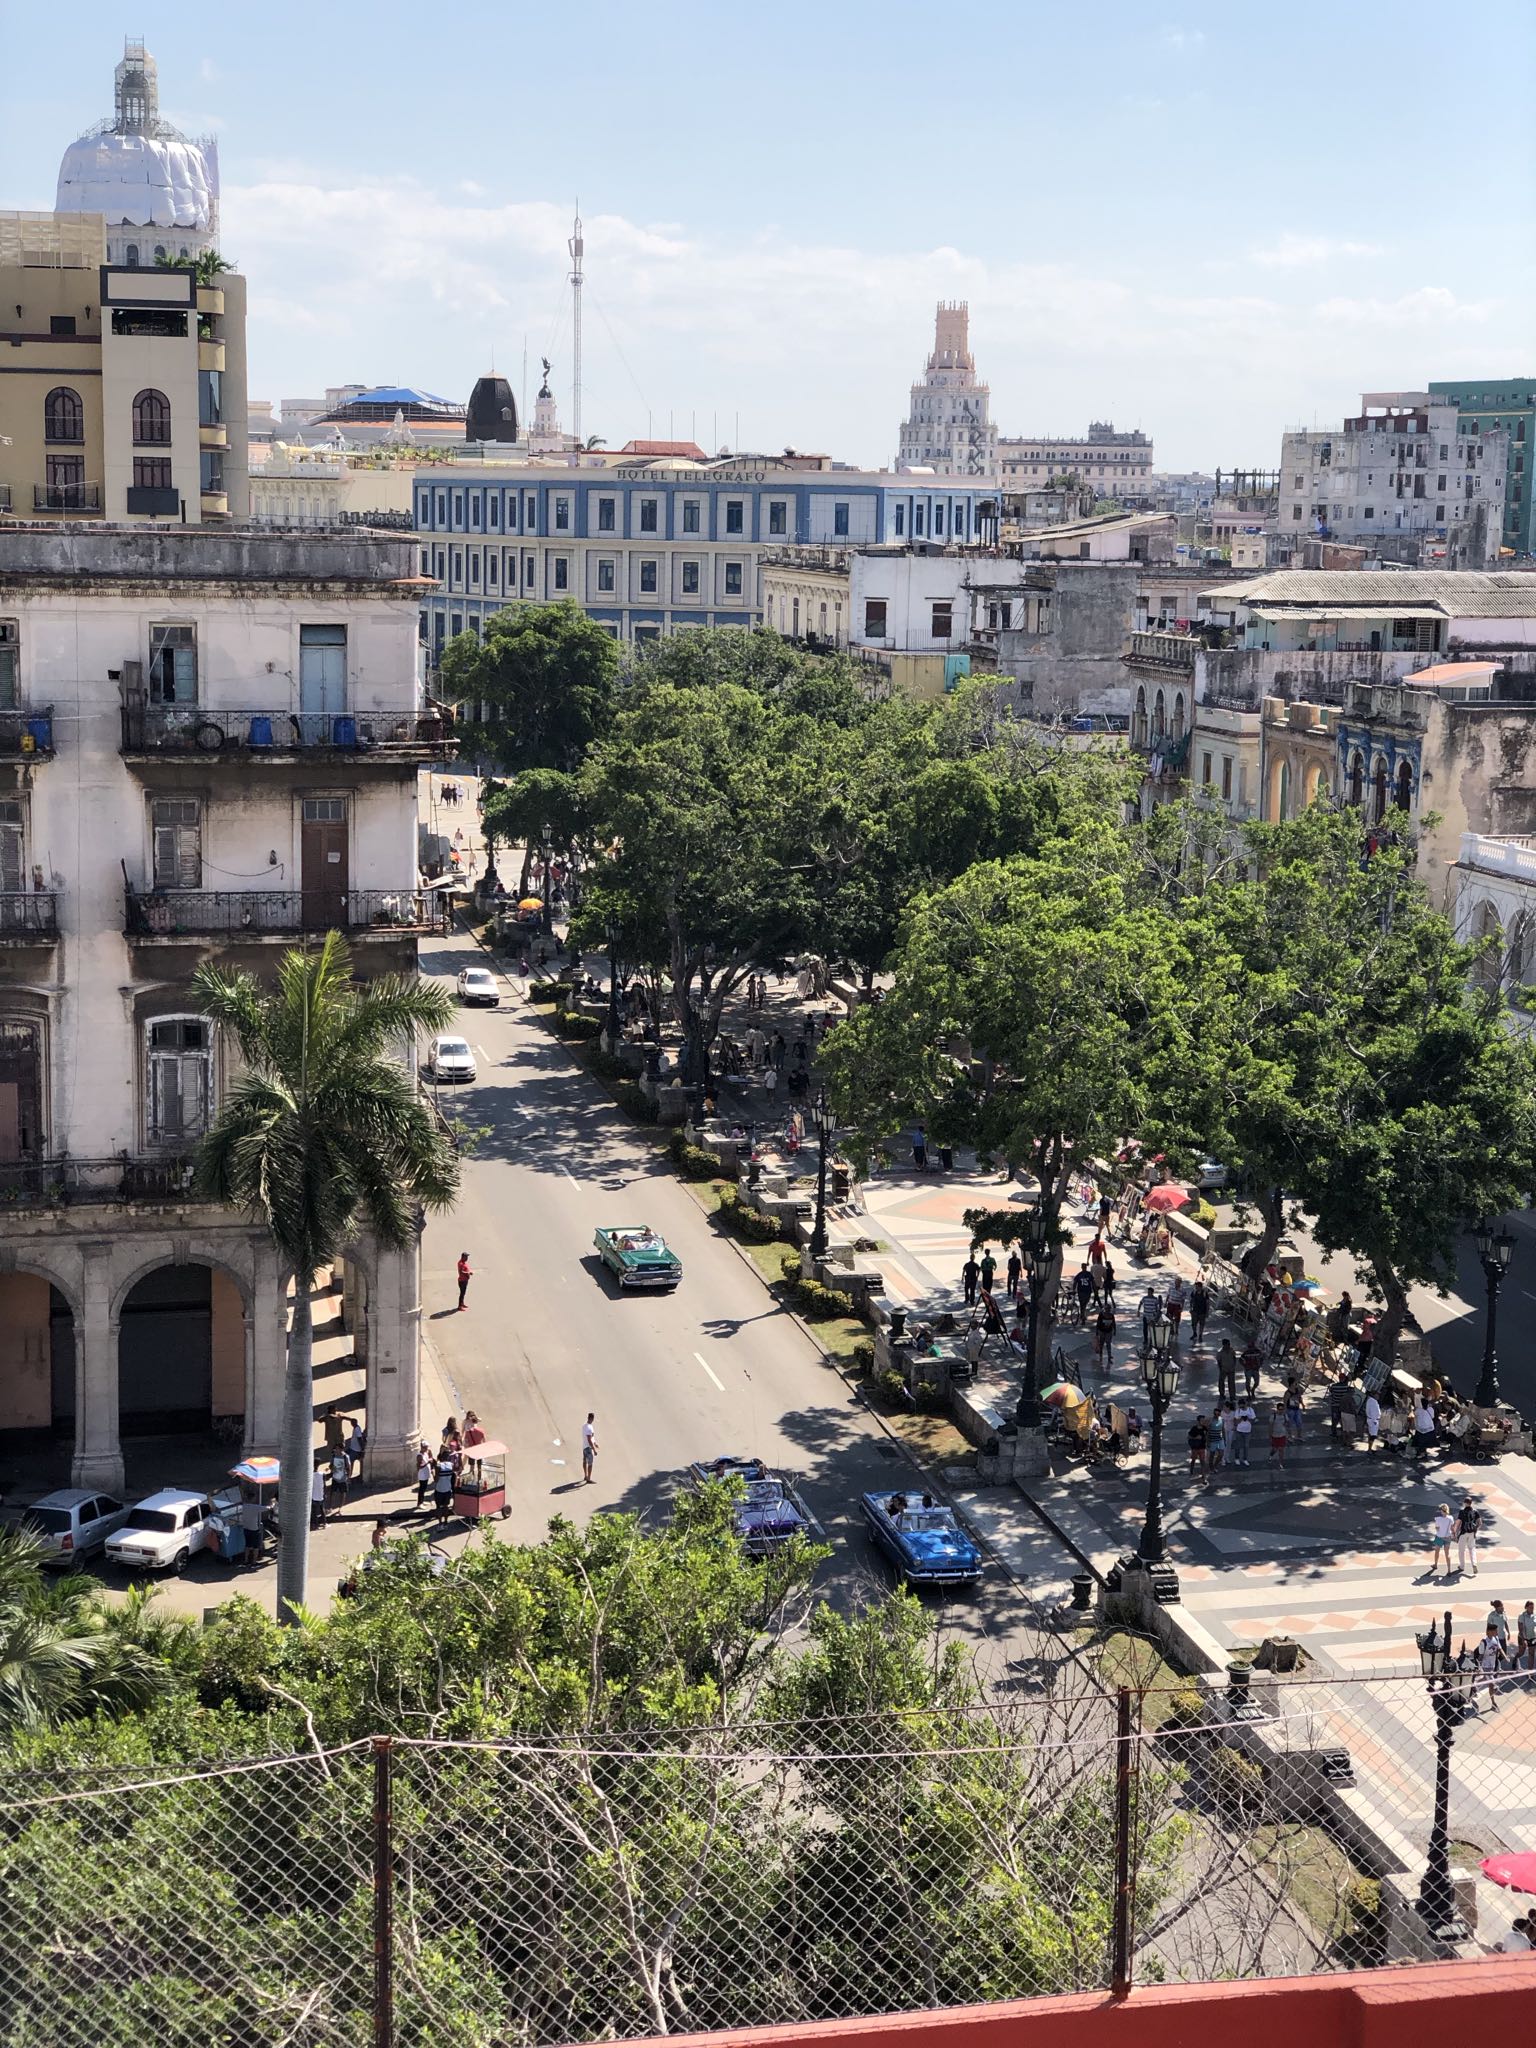 Photo 15 of 221 from the album Highlights Cuba 2019.